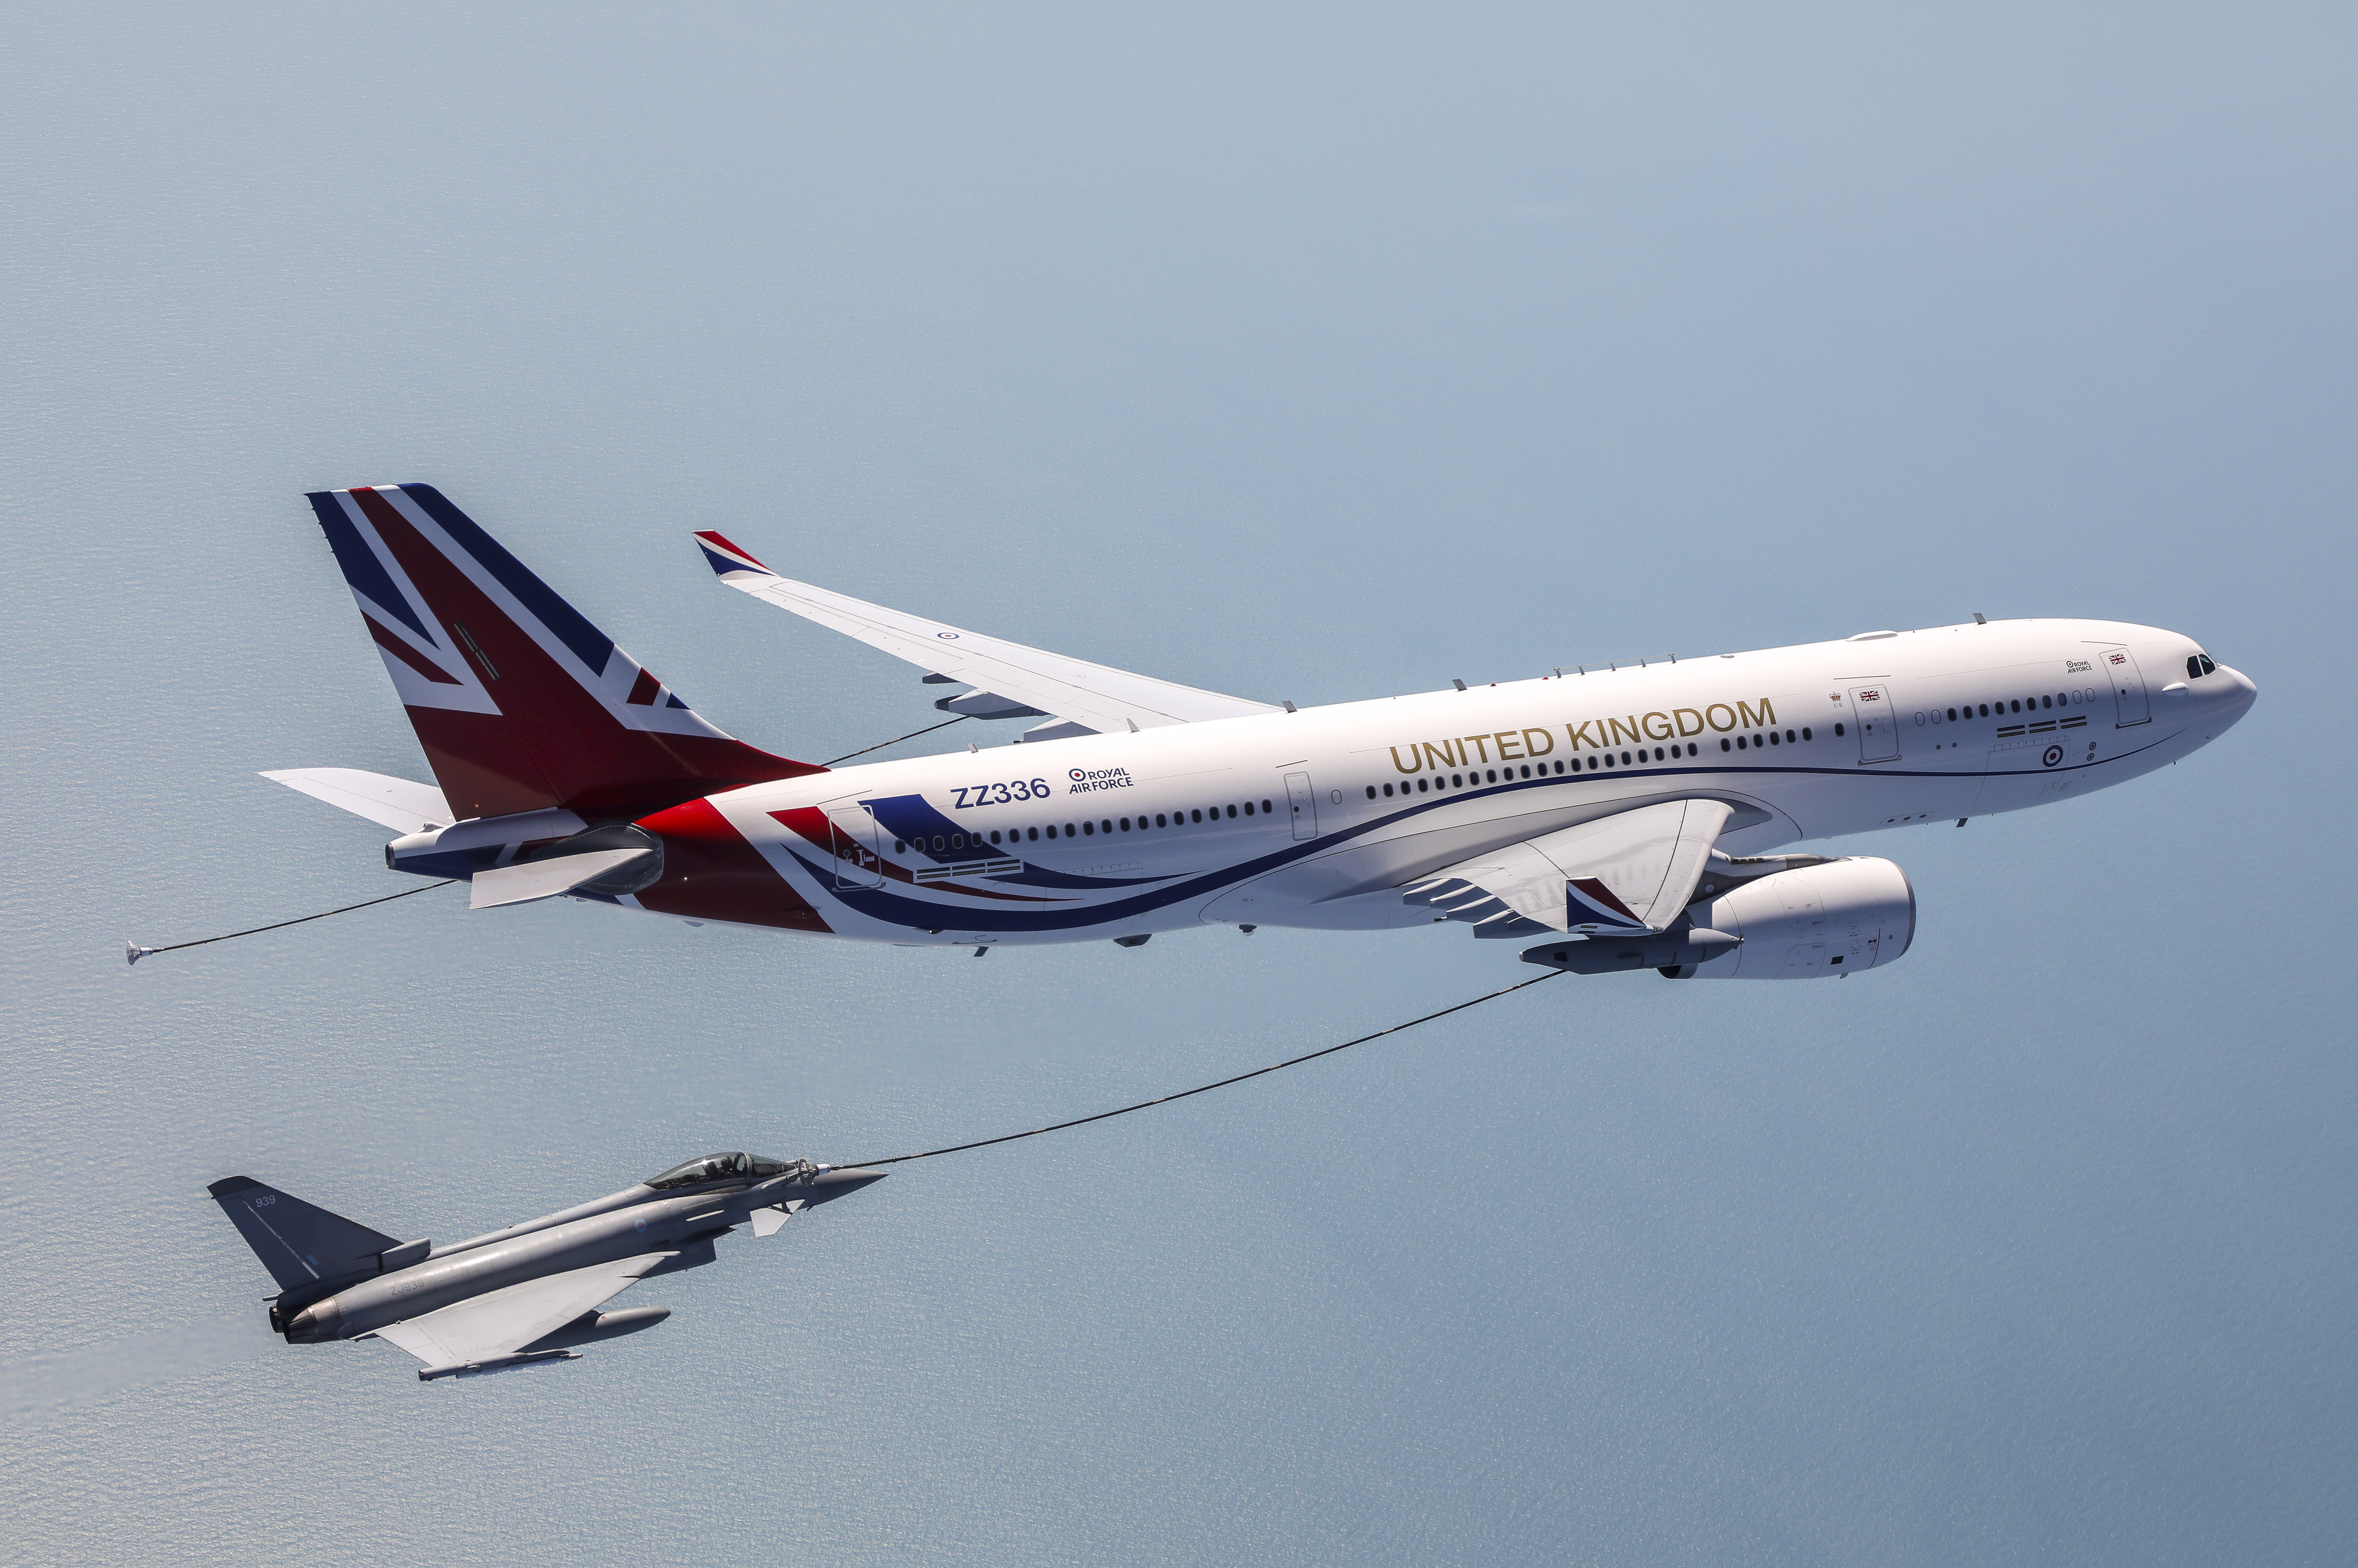 Image shows Typhoon and Voyager during air to air refuelling.